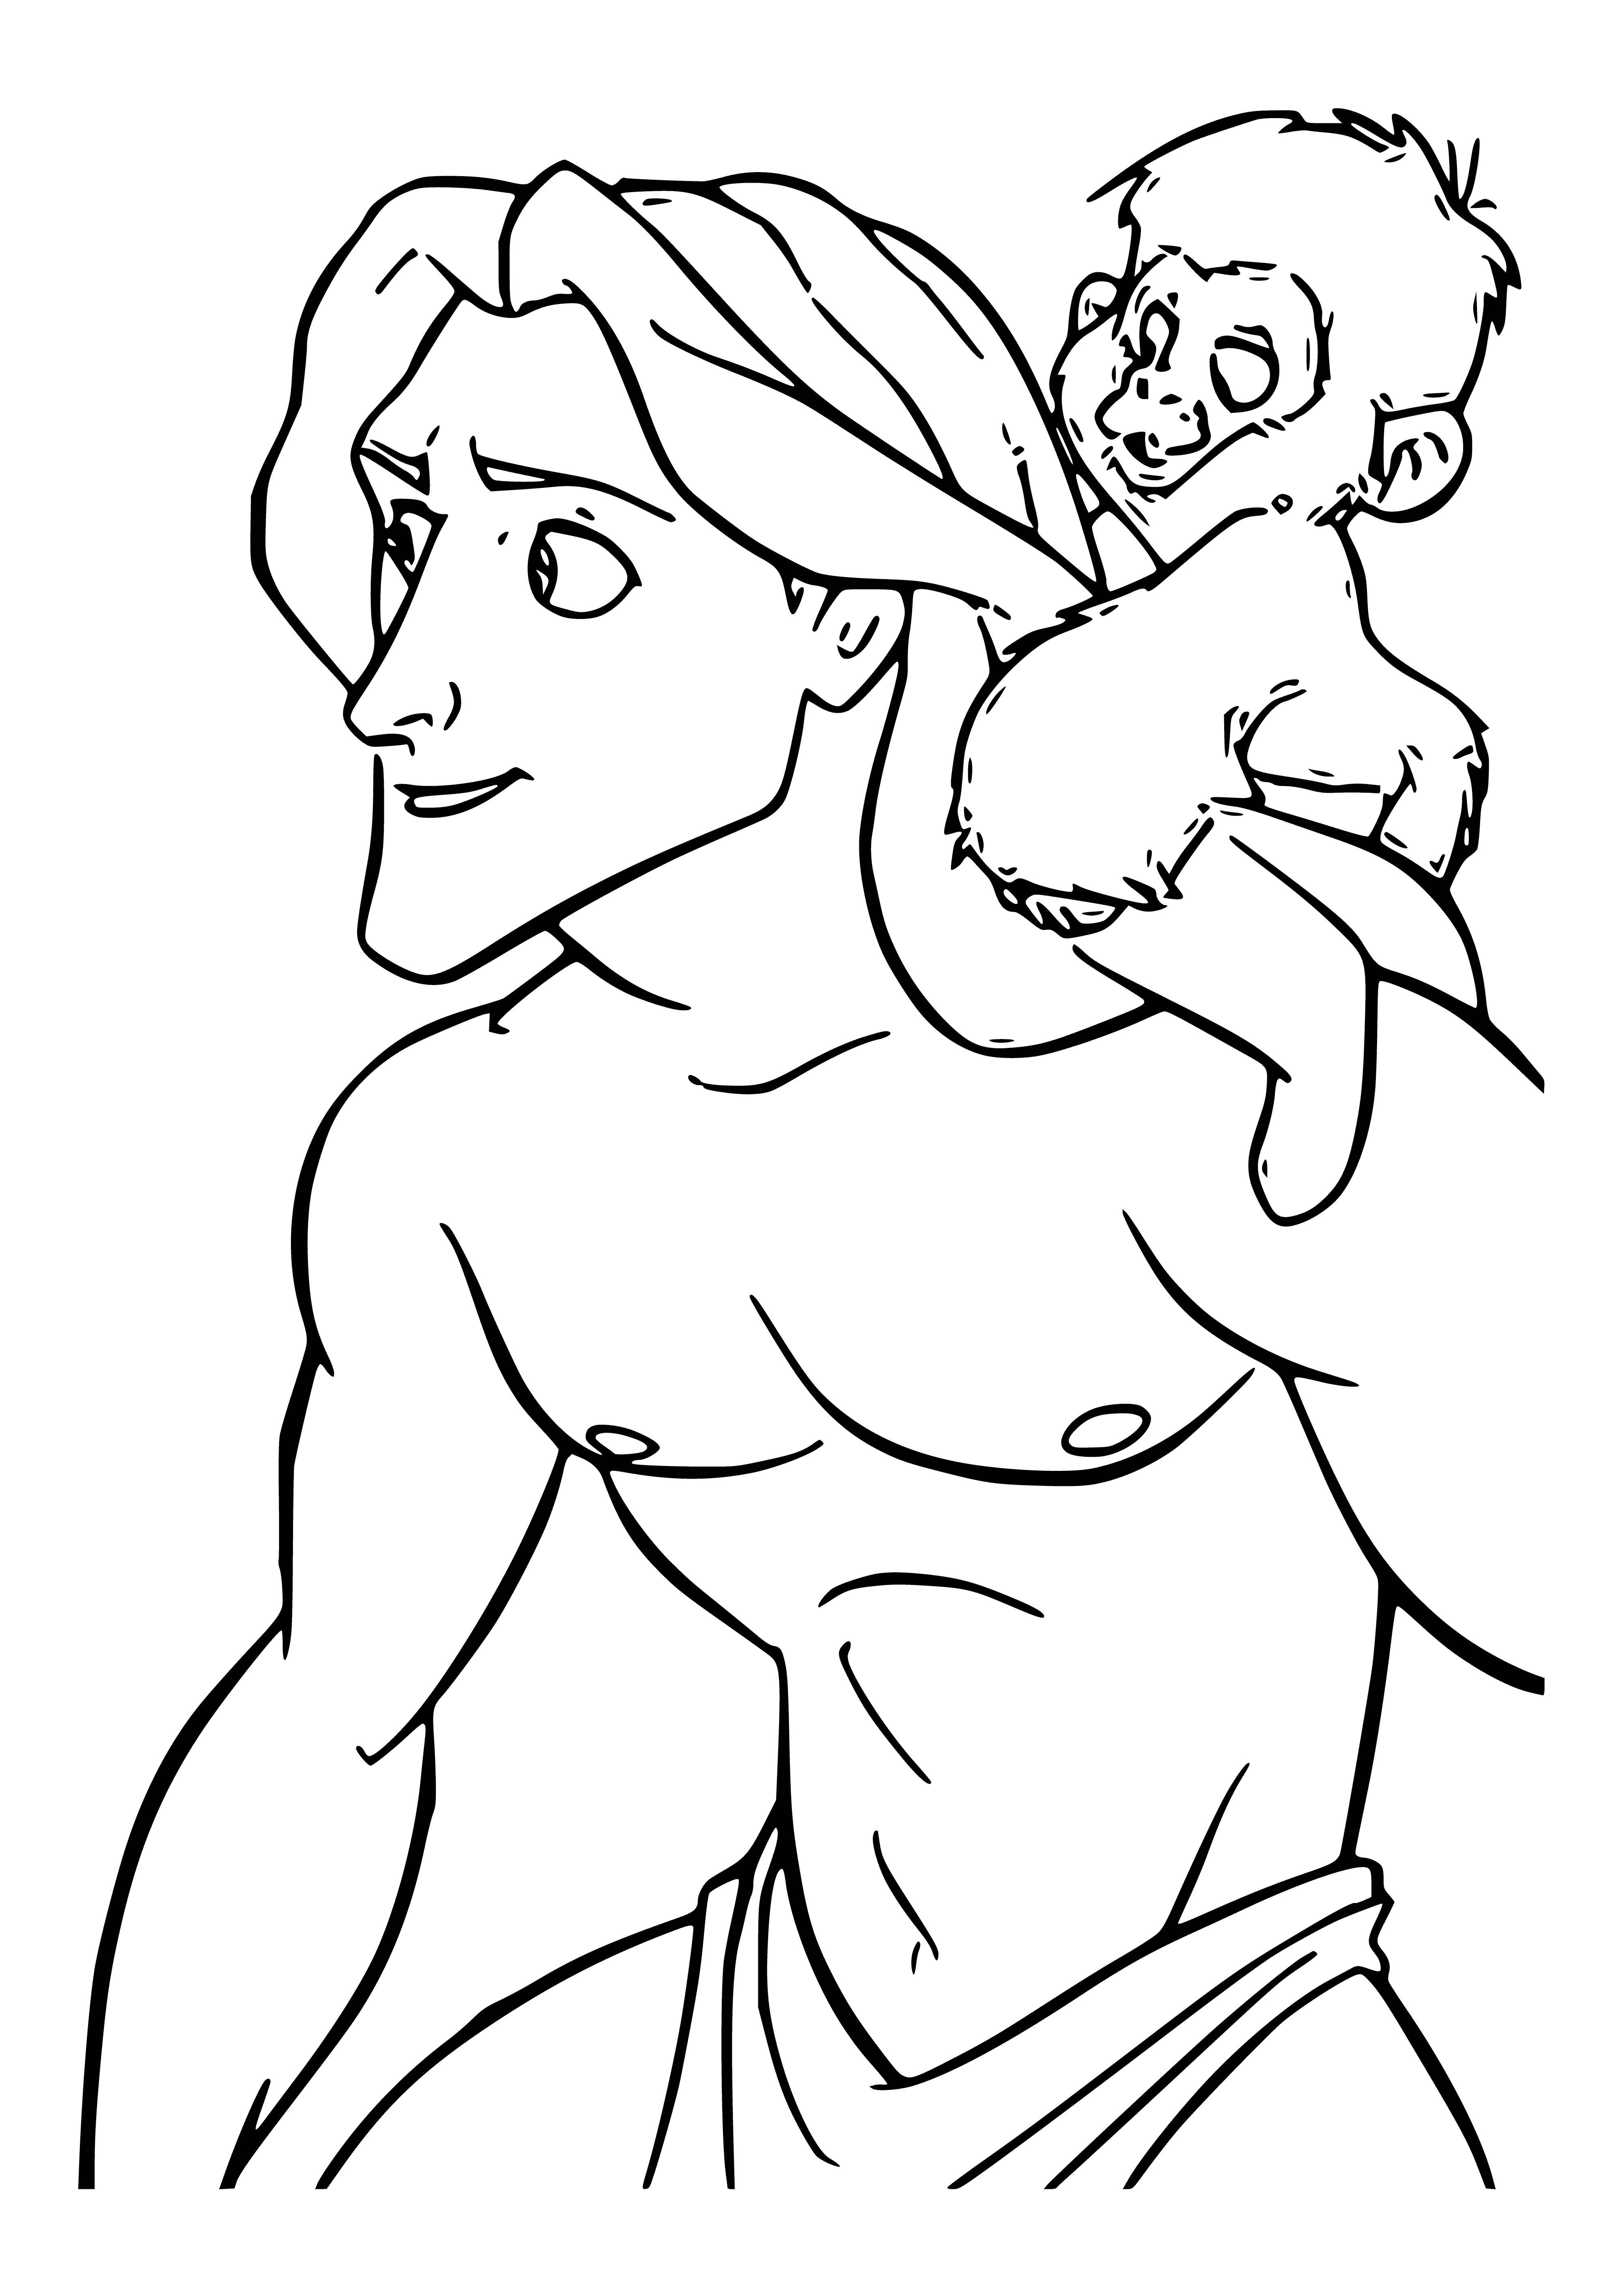 coloring page: Tarzan and a monkey swing through the air above a river.